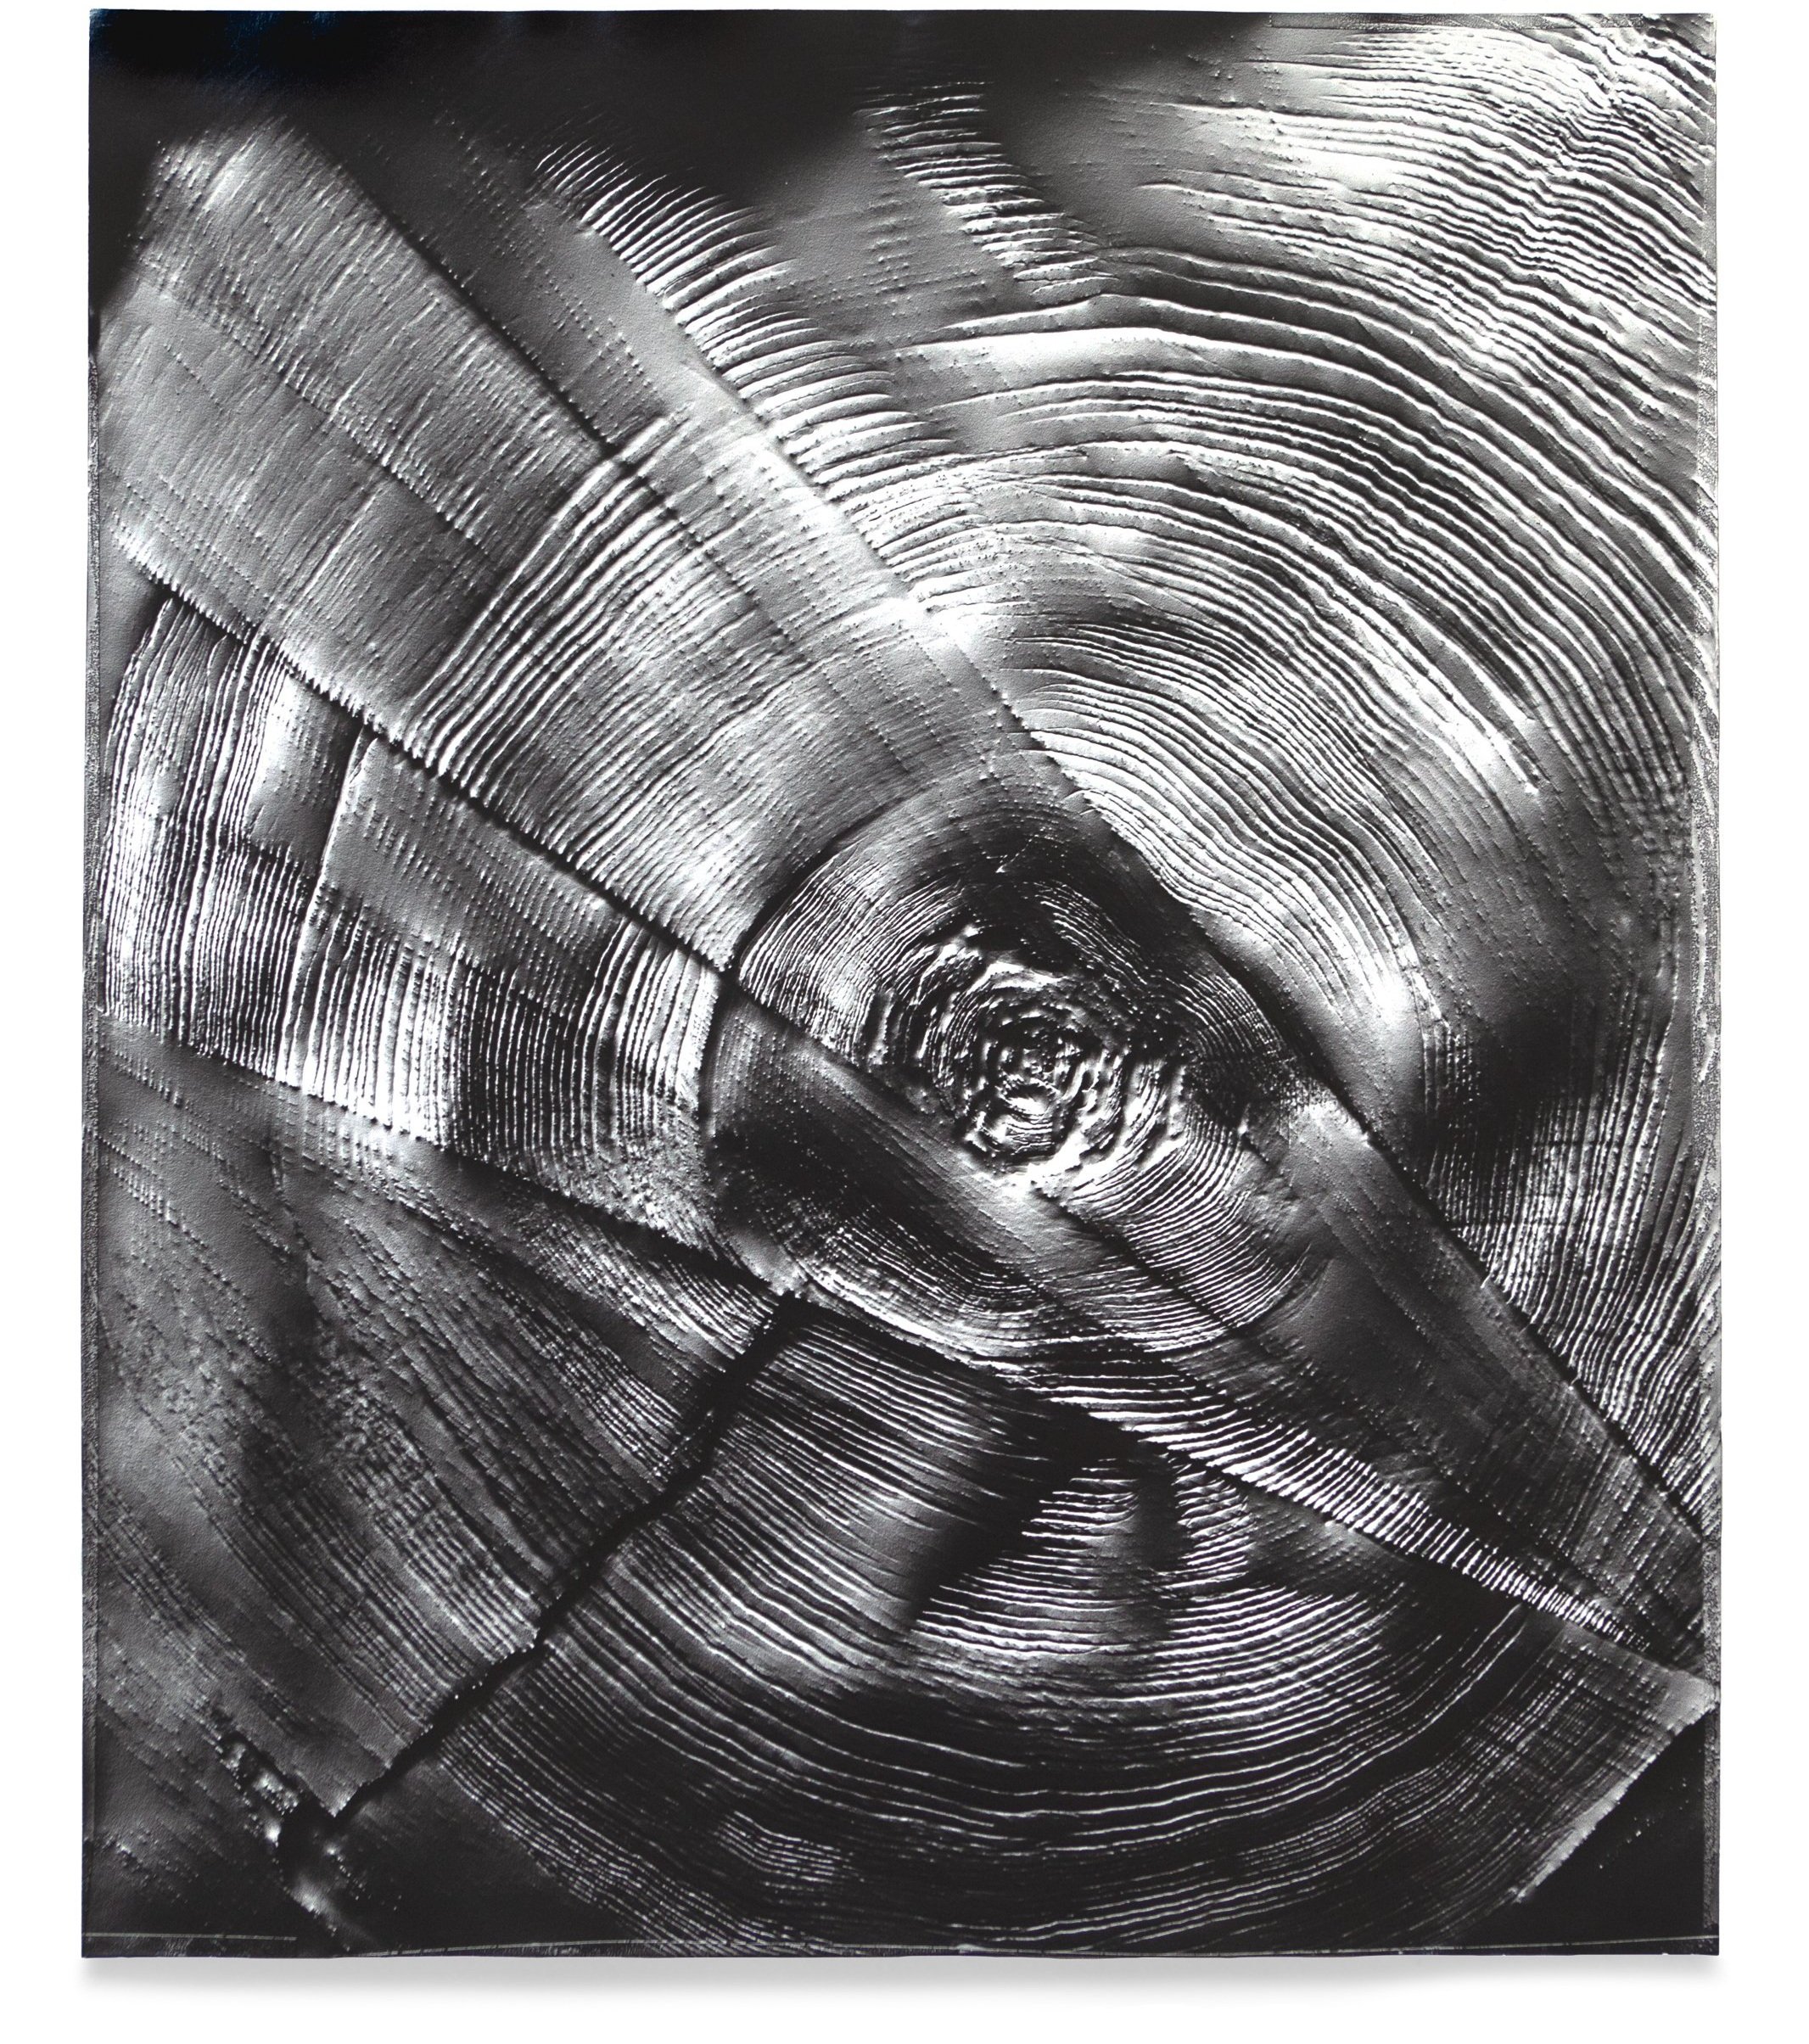   Automatic Earth 58,  2017 Photographic rubbing (embossed silver gelatin photogram) 24 x 20 in 